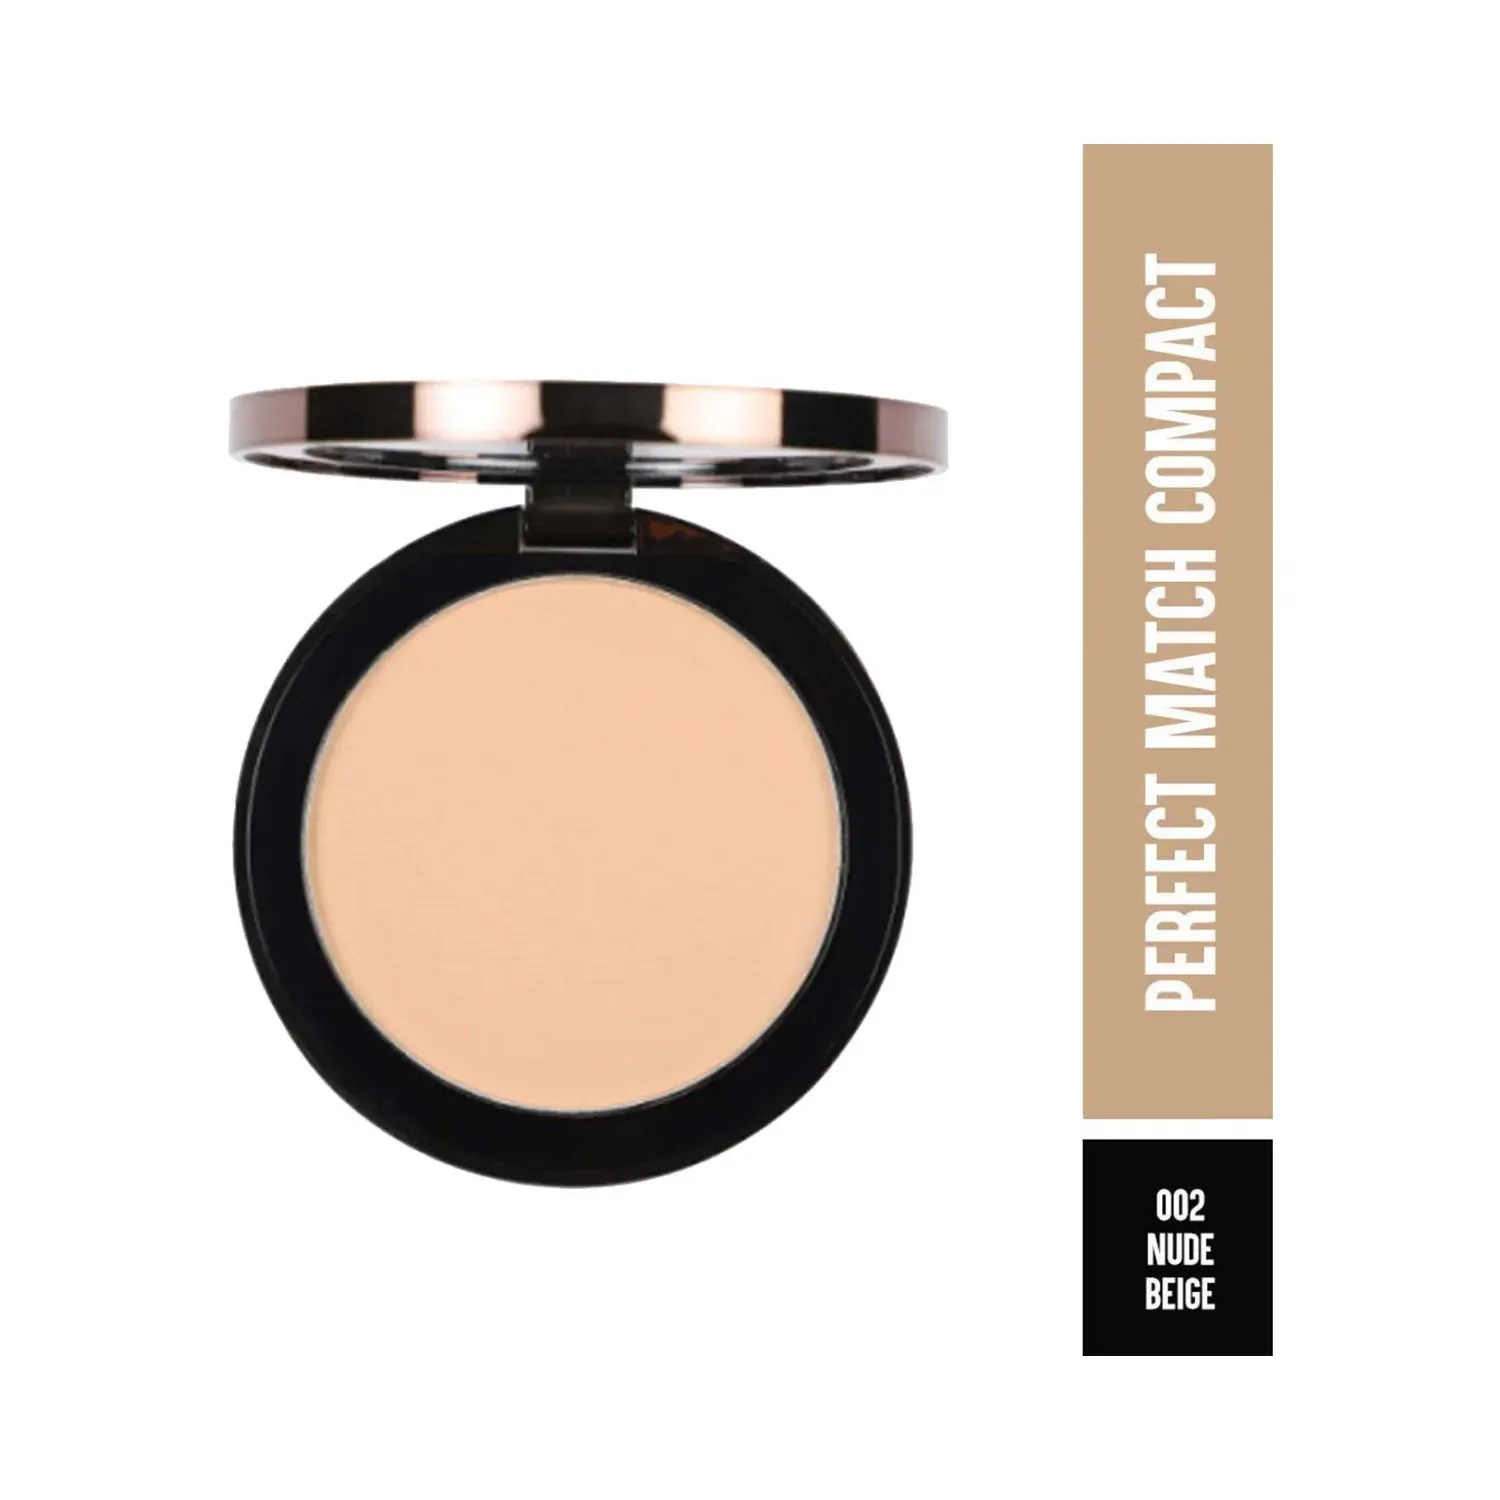 Colorbar | Colorbar Perfect Match New Press Compact Powder - 002 Nude Beige (9g)